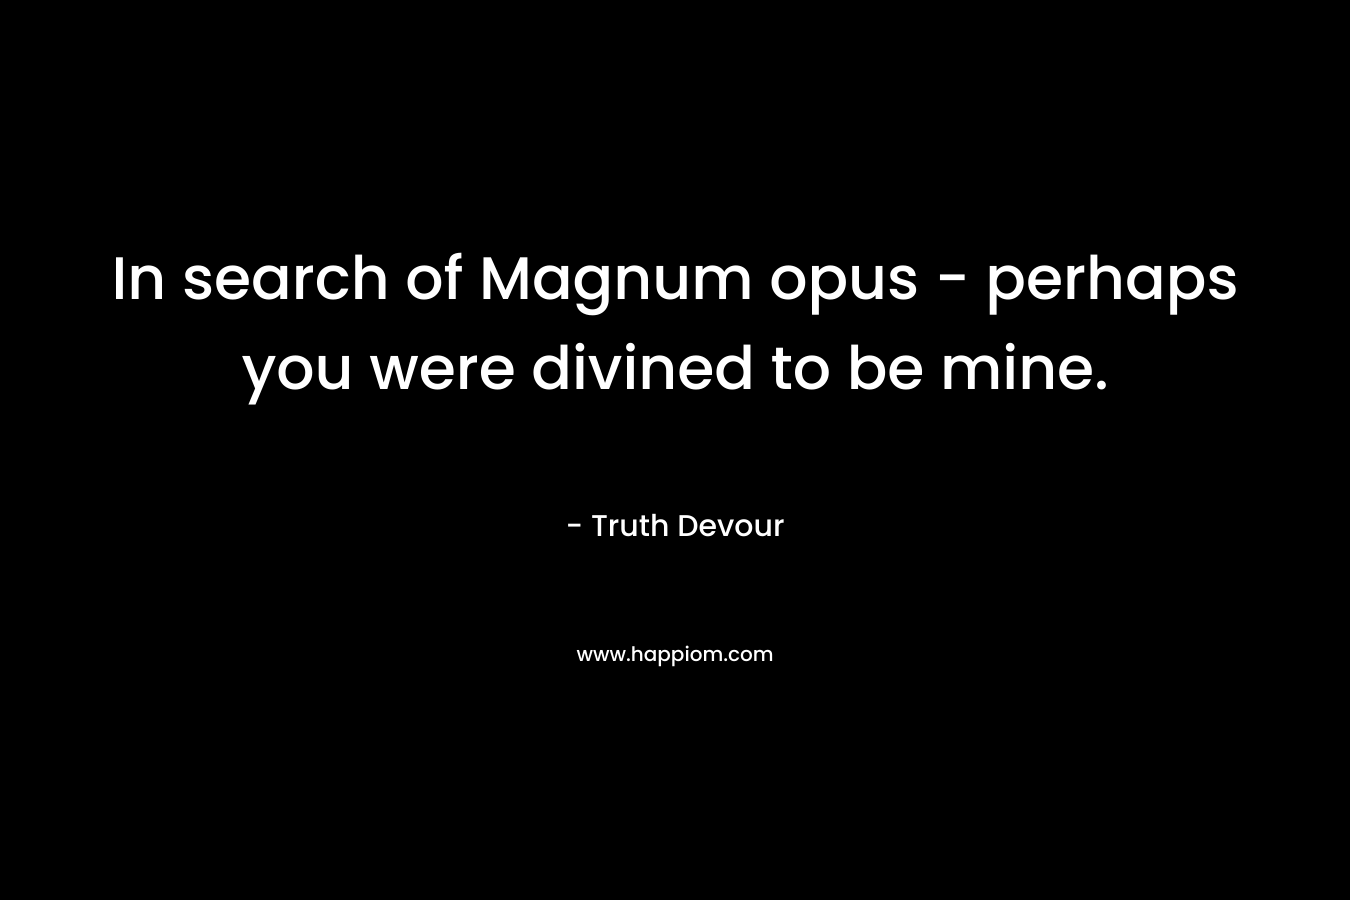 In search of Magnum opus - perhaps you were divined to be mine.